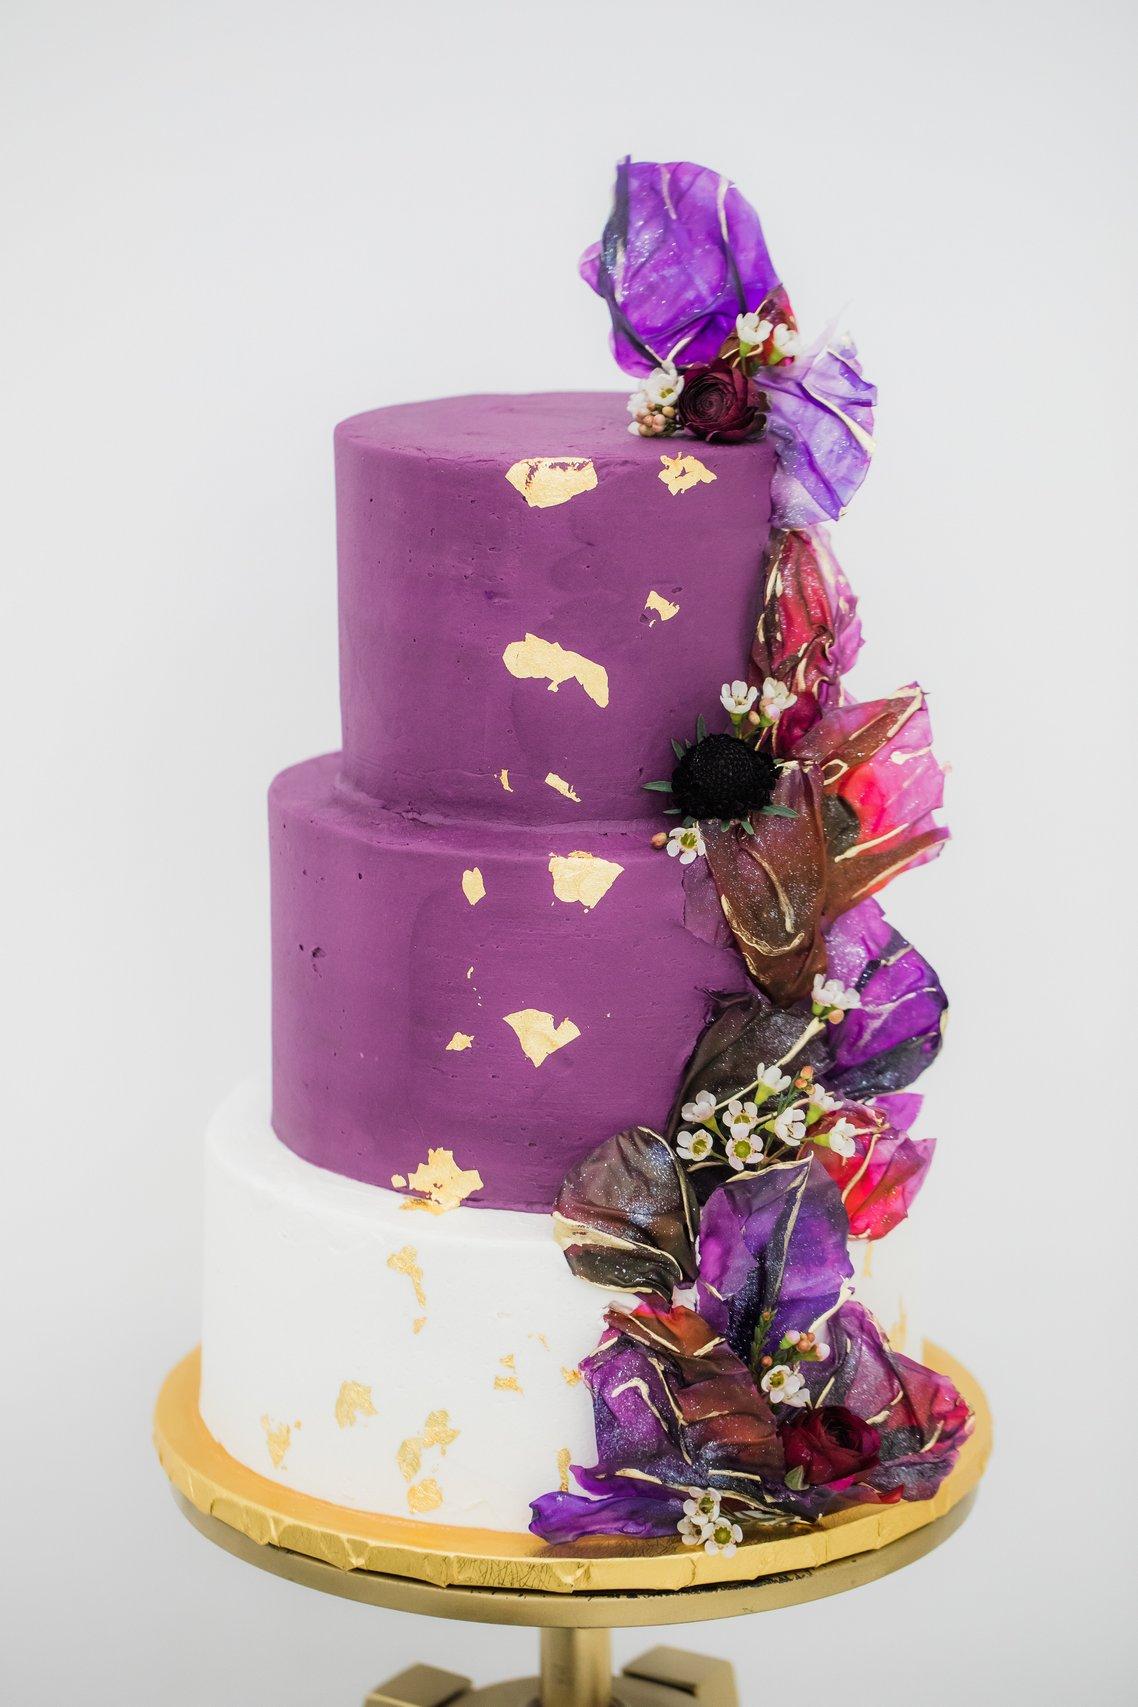 Wedding Cake With Violet Cream Cheese Frosting Decorated With Caramel Vase  And Golden Chocolate Spheres On